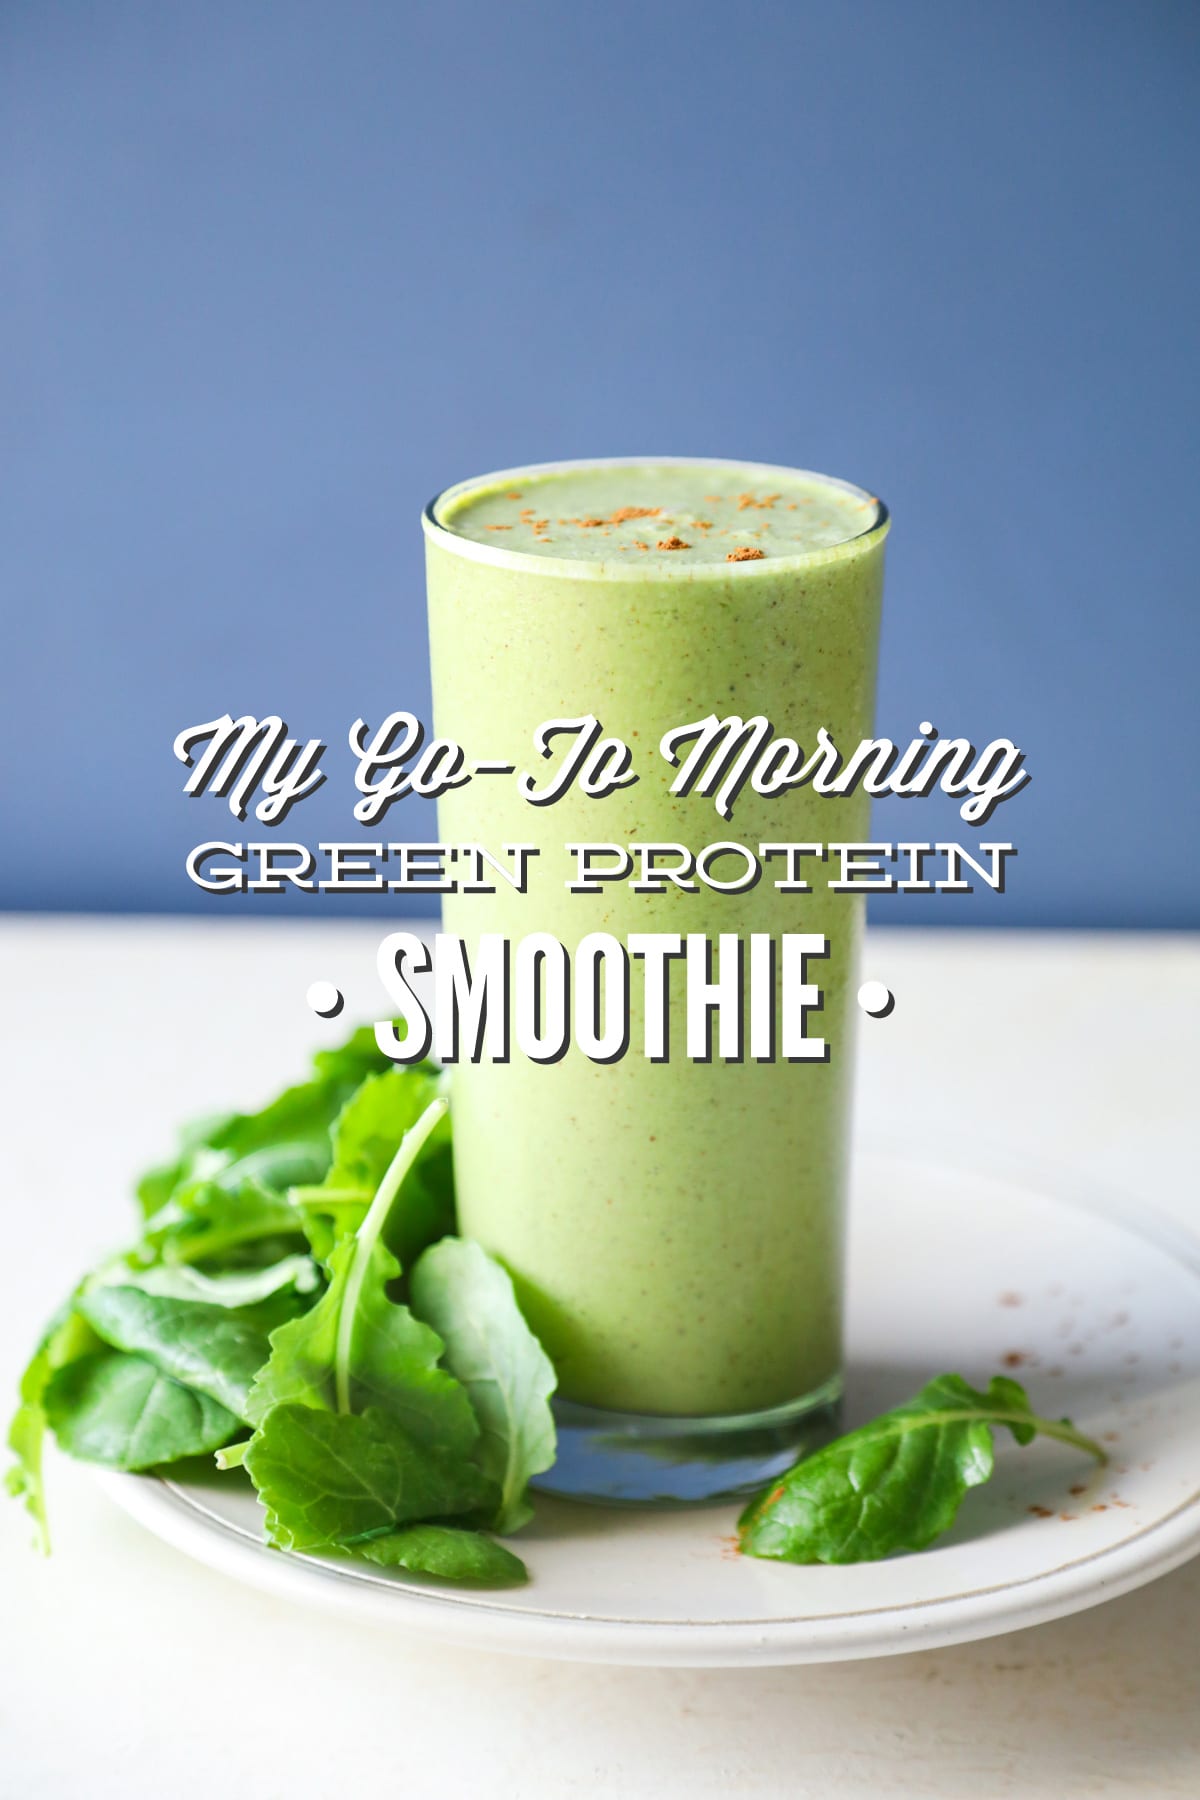 My Go-To Morning Green Protein Smoothie